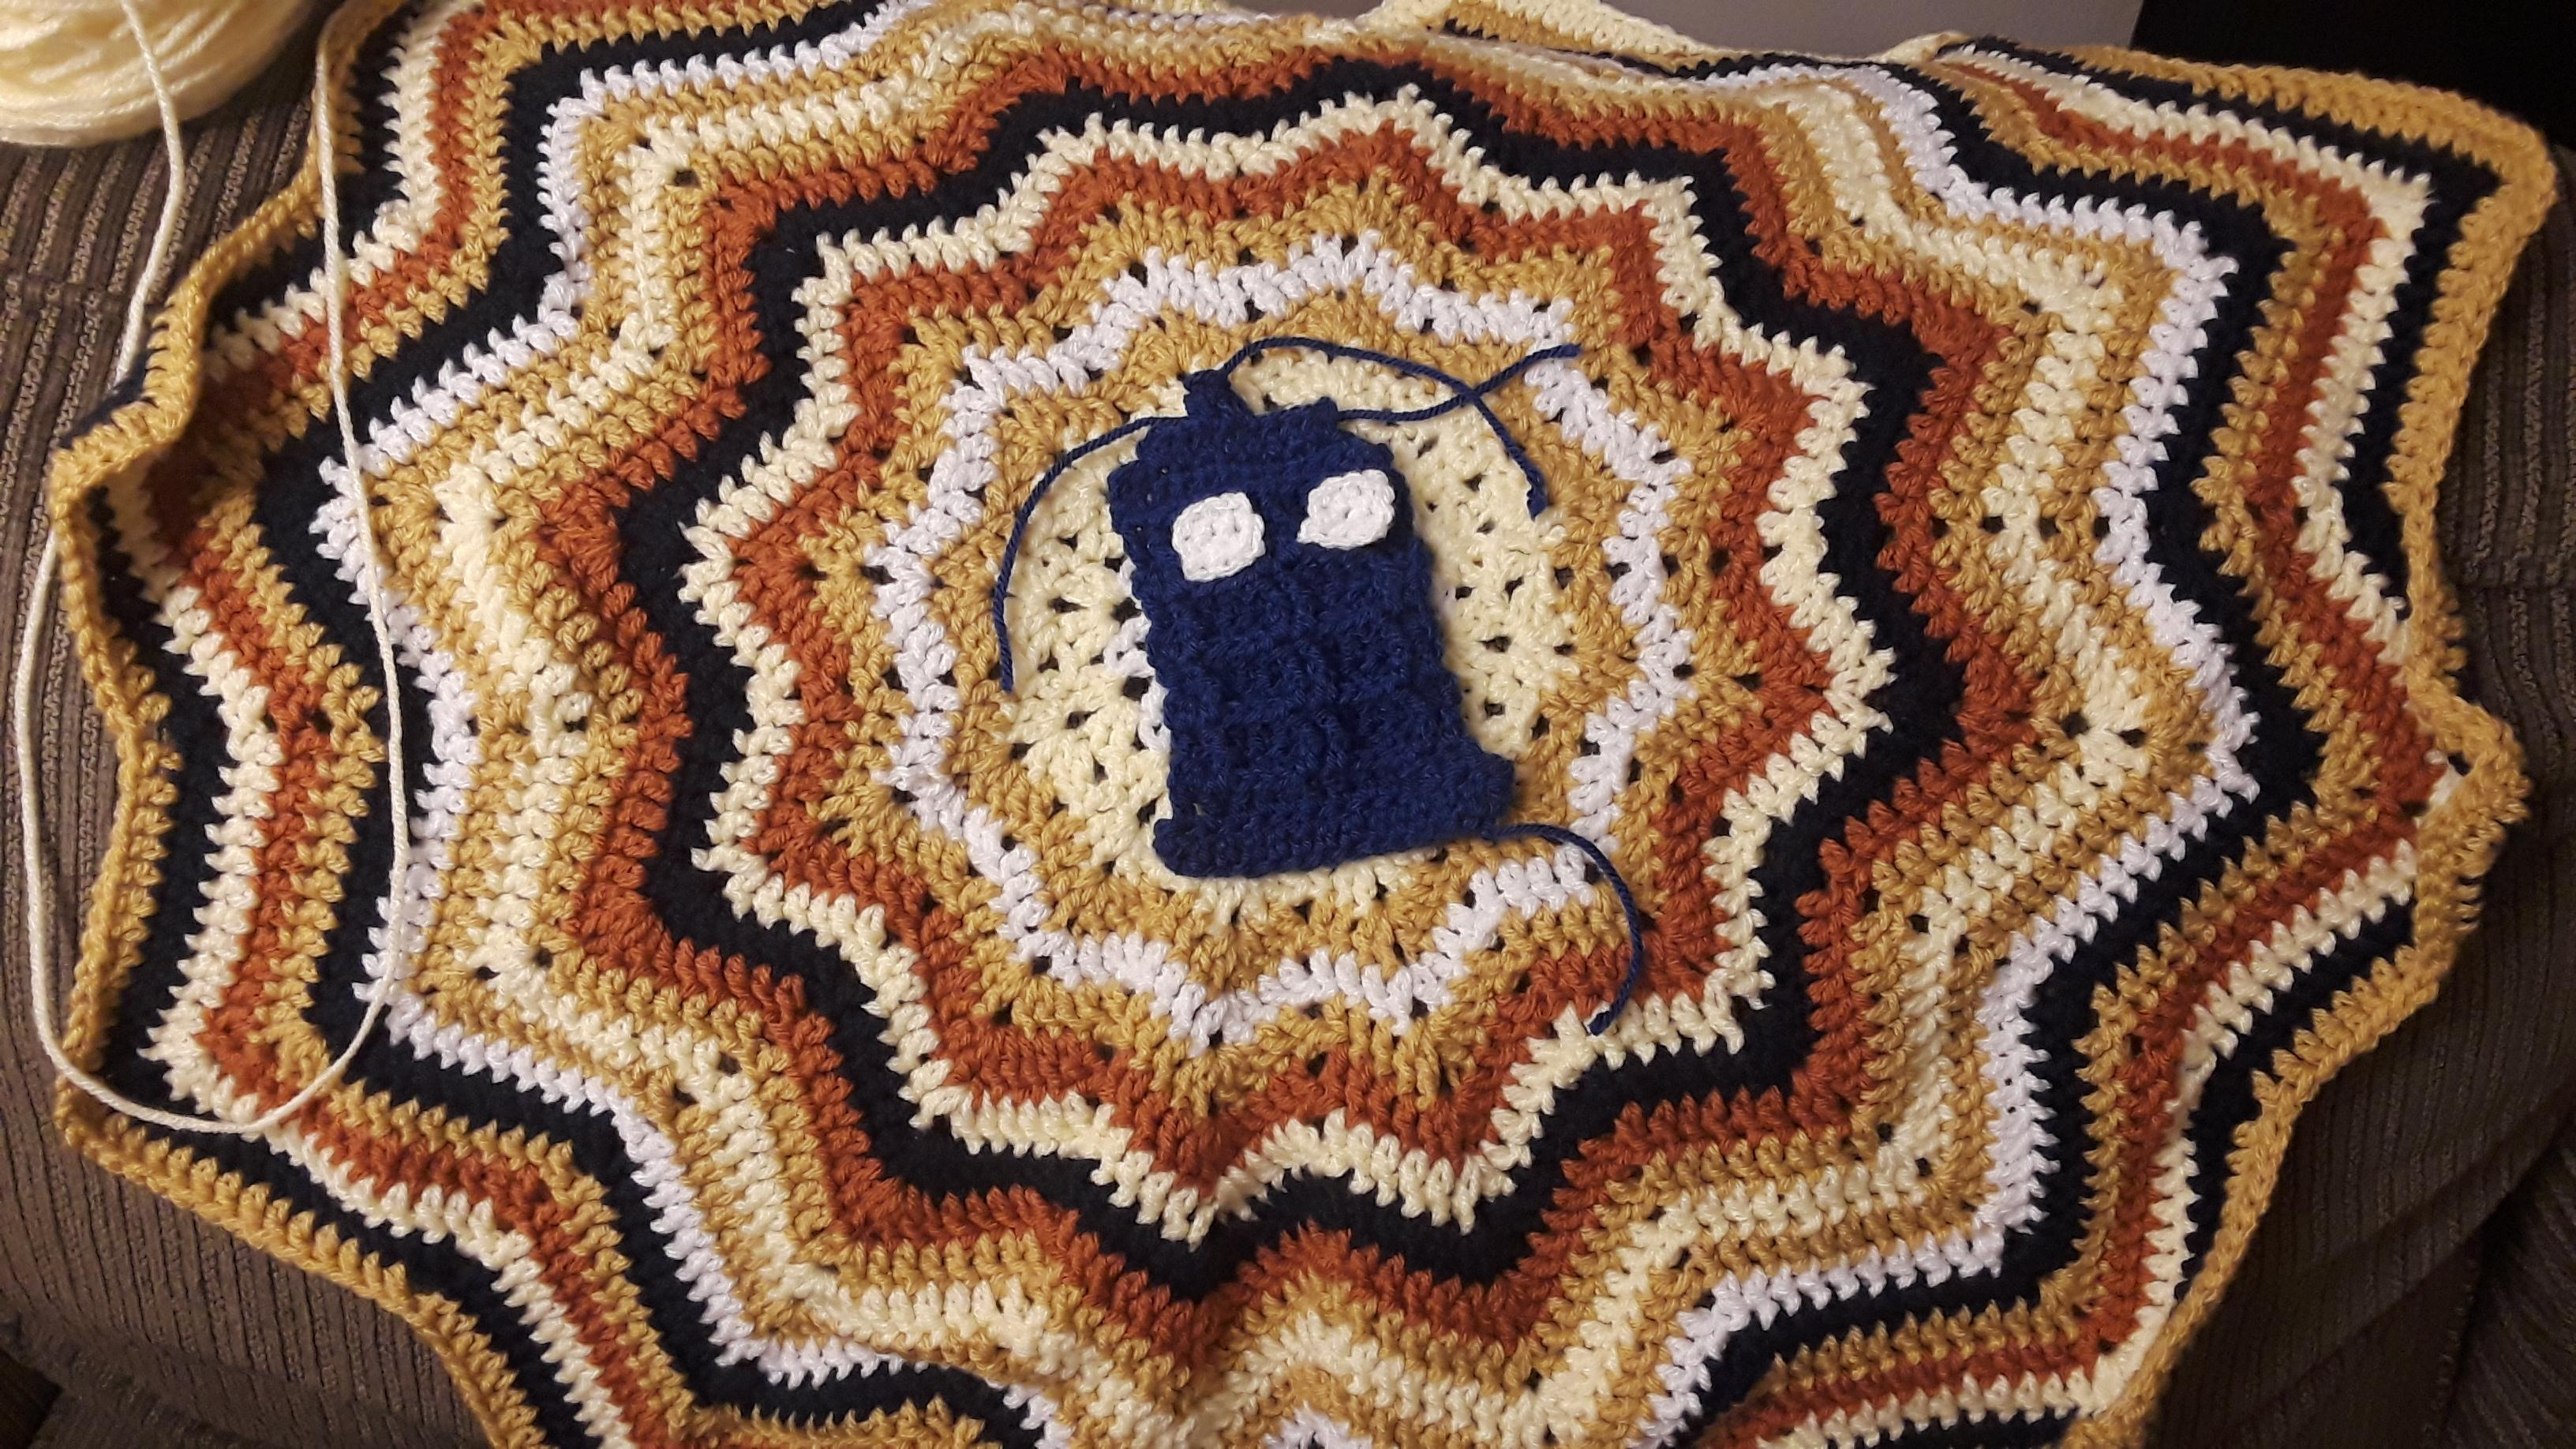 Doctor Who Crochet Blanket Pattern Im So Close To Finishing This Doctor Who Ba Blanket Its Based